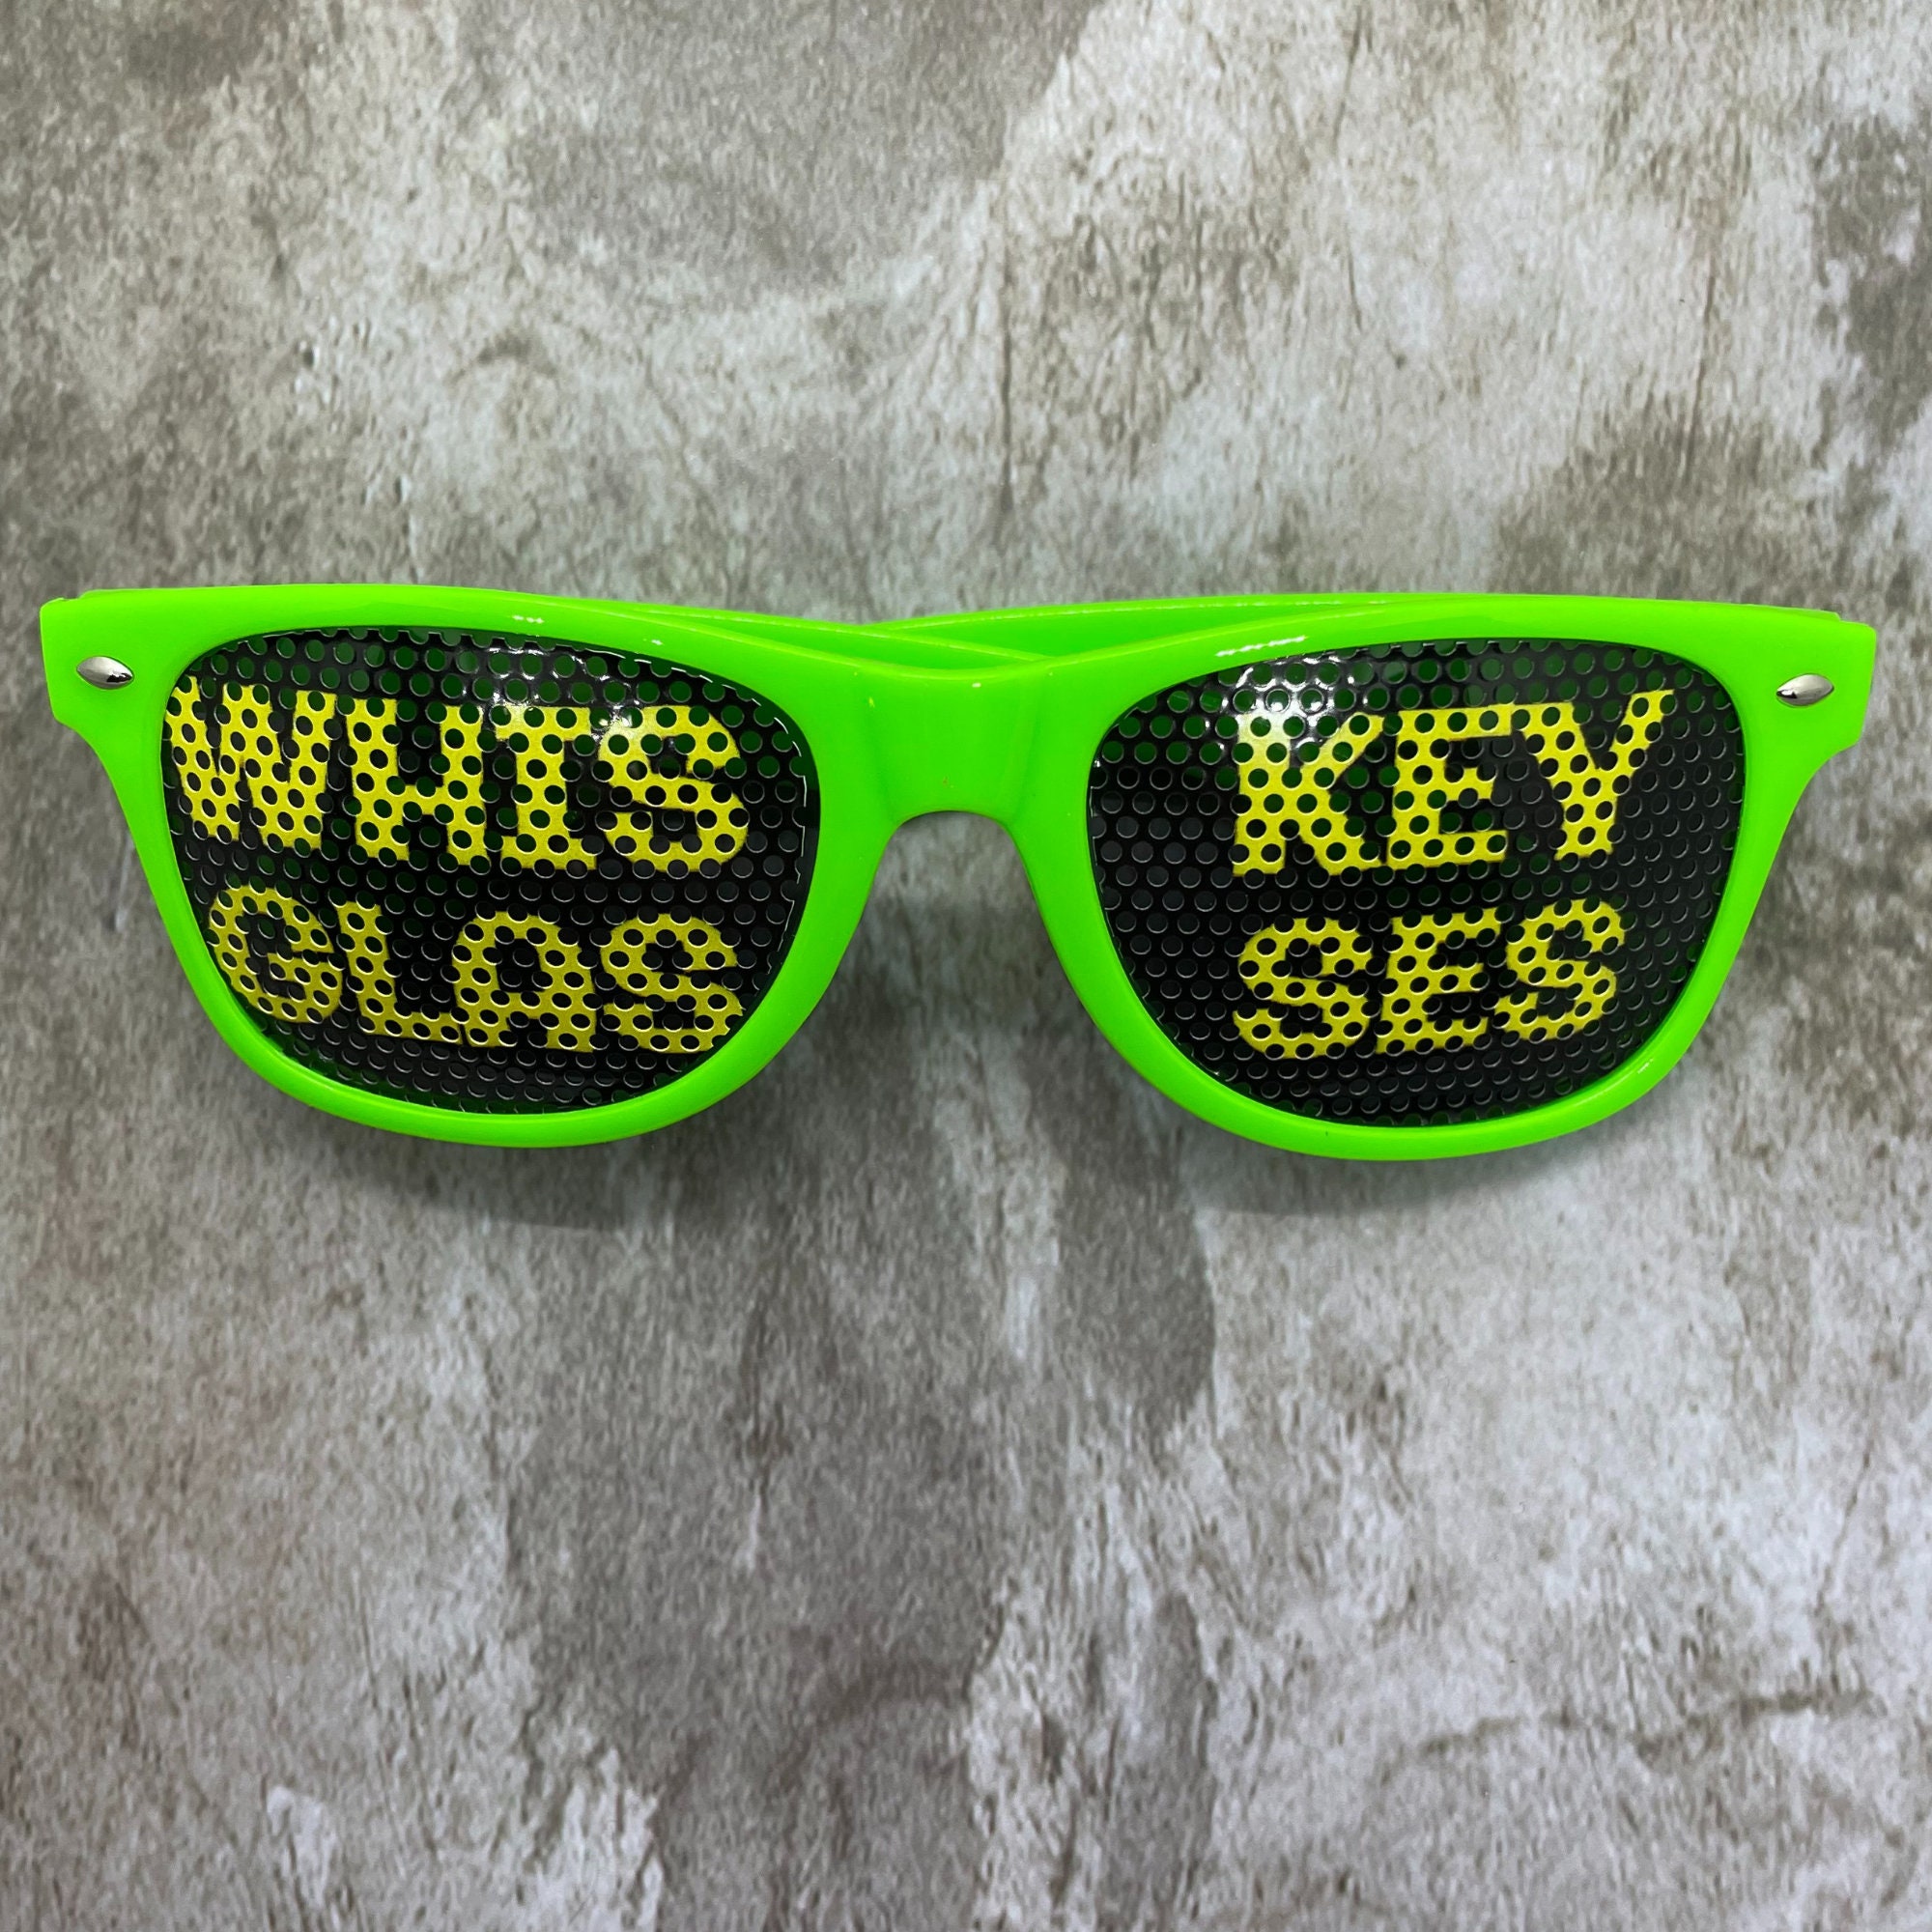 Fun Novelty Glasses At Tesco - Michy Finds